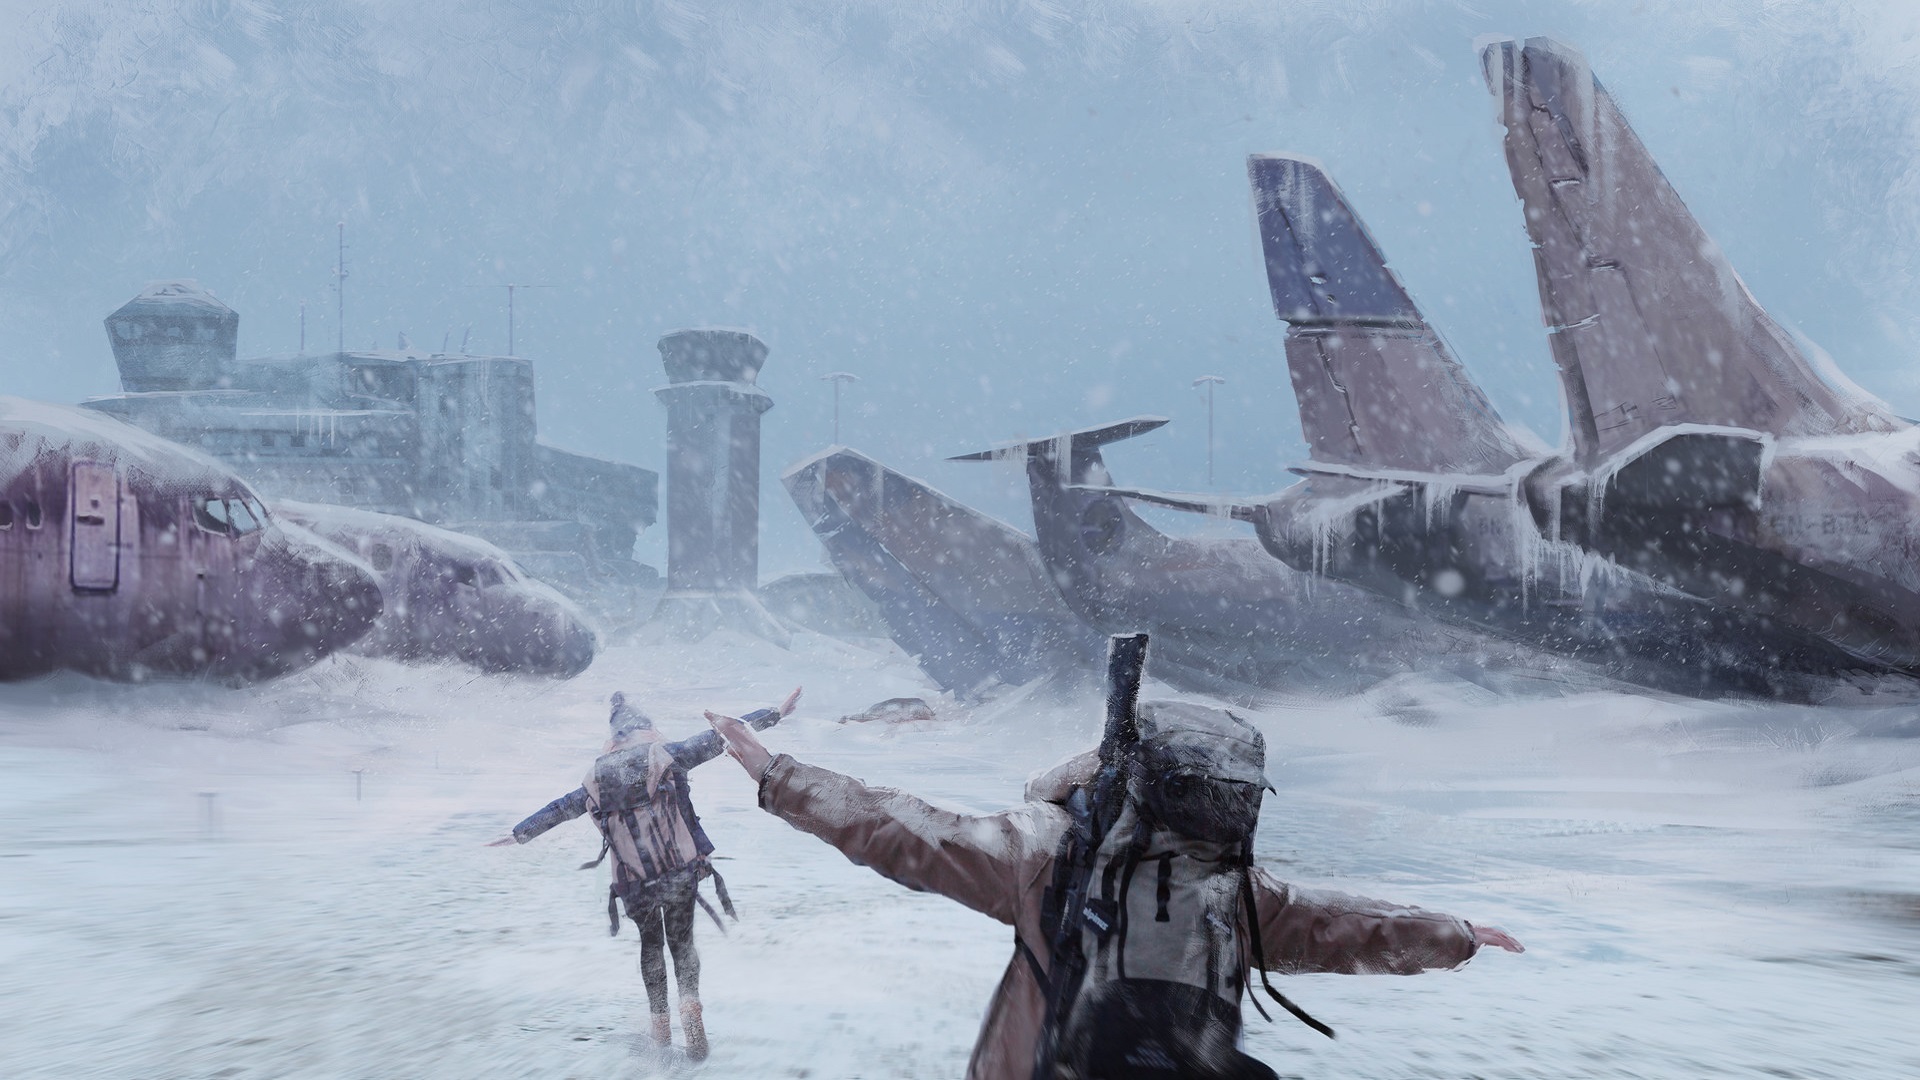 General 1920x1080 airport snow backpacks apocalyptic airplane winter wreck vehicle cold ice aircraft ArtStation Filip Dudek